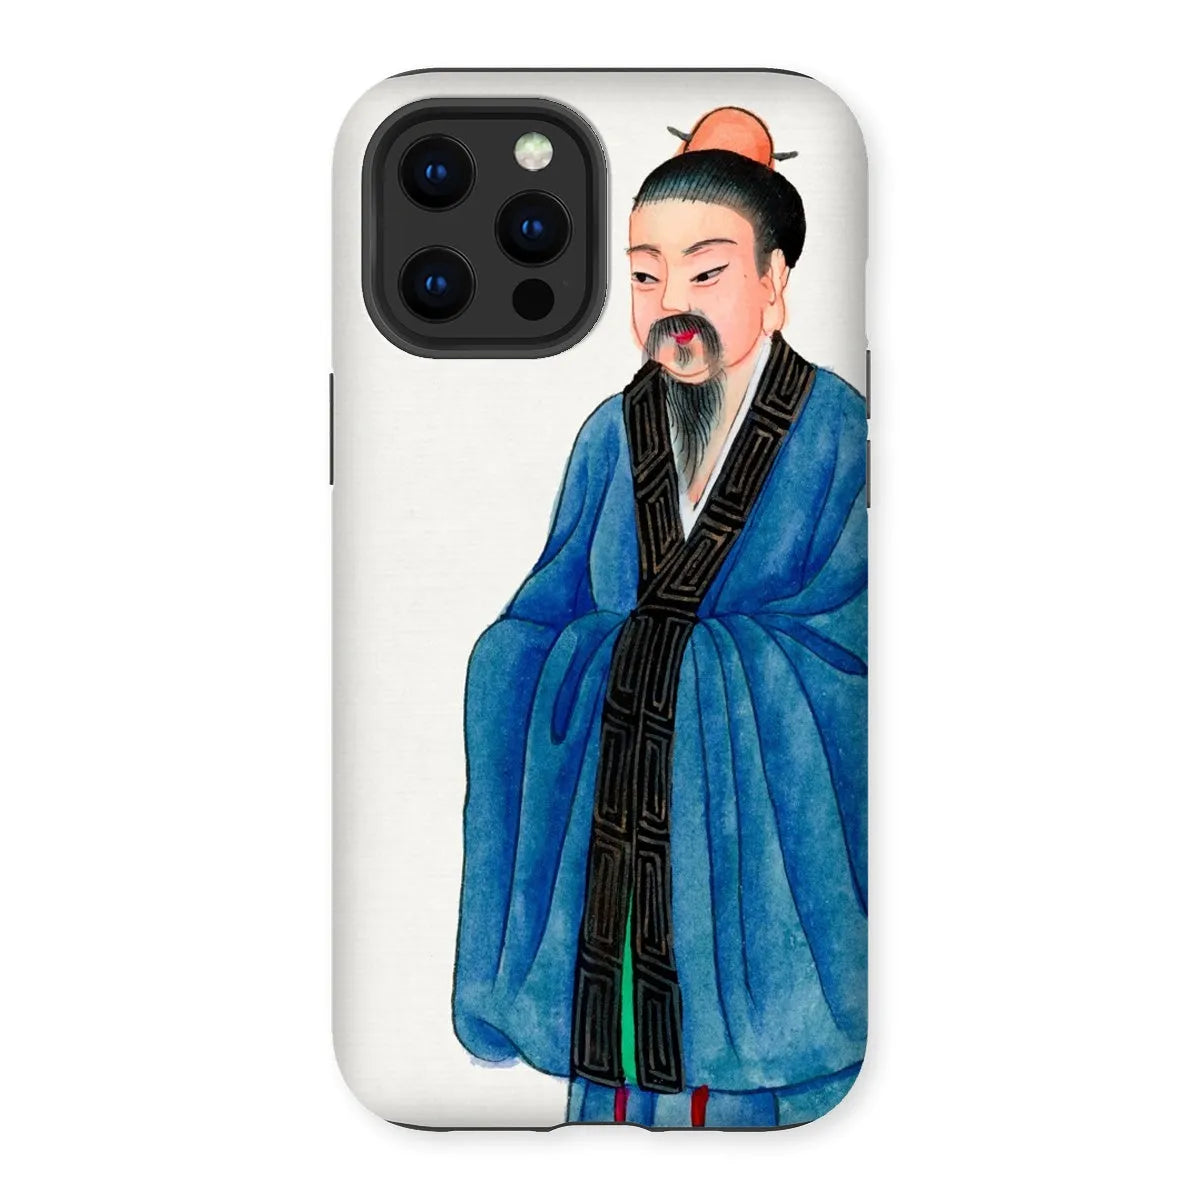 Grand Master - Chinese Buddhist Aesthetic Art Phone Case - Iphone 12 Pro Max / Matte - Mobile Phone Cases - Aesthetic